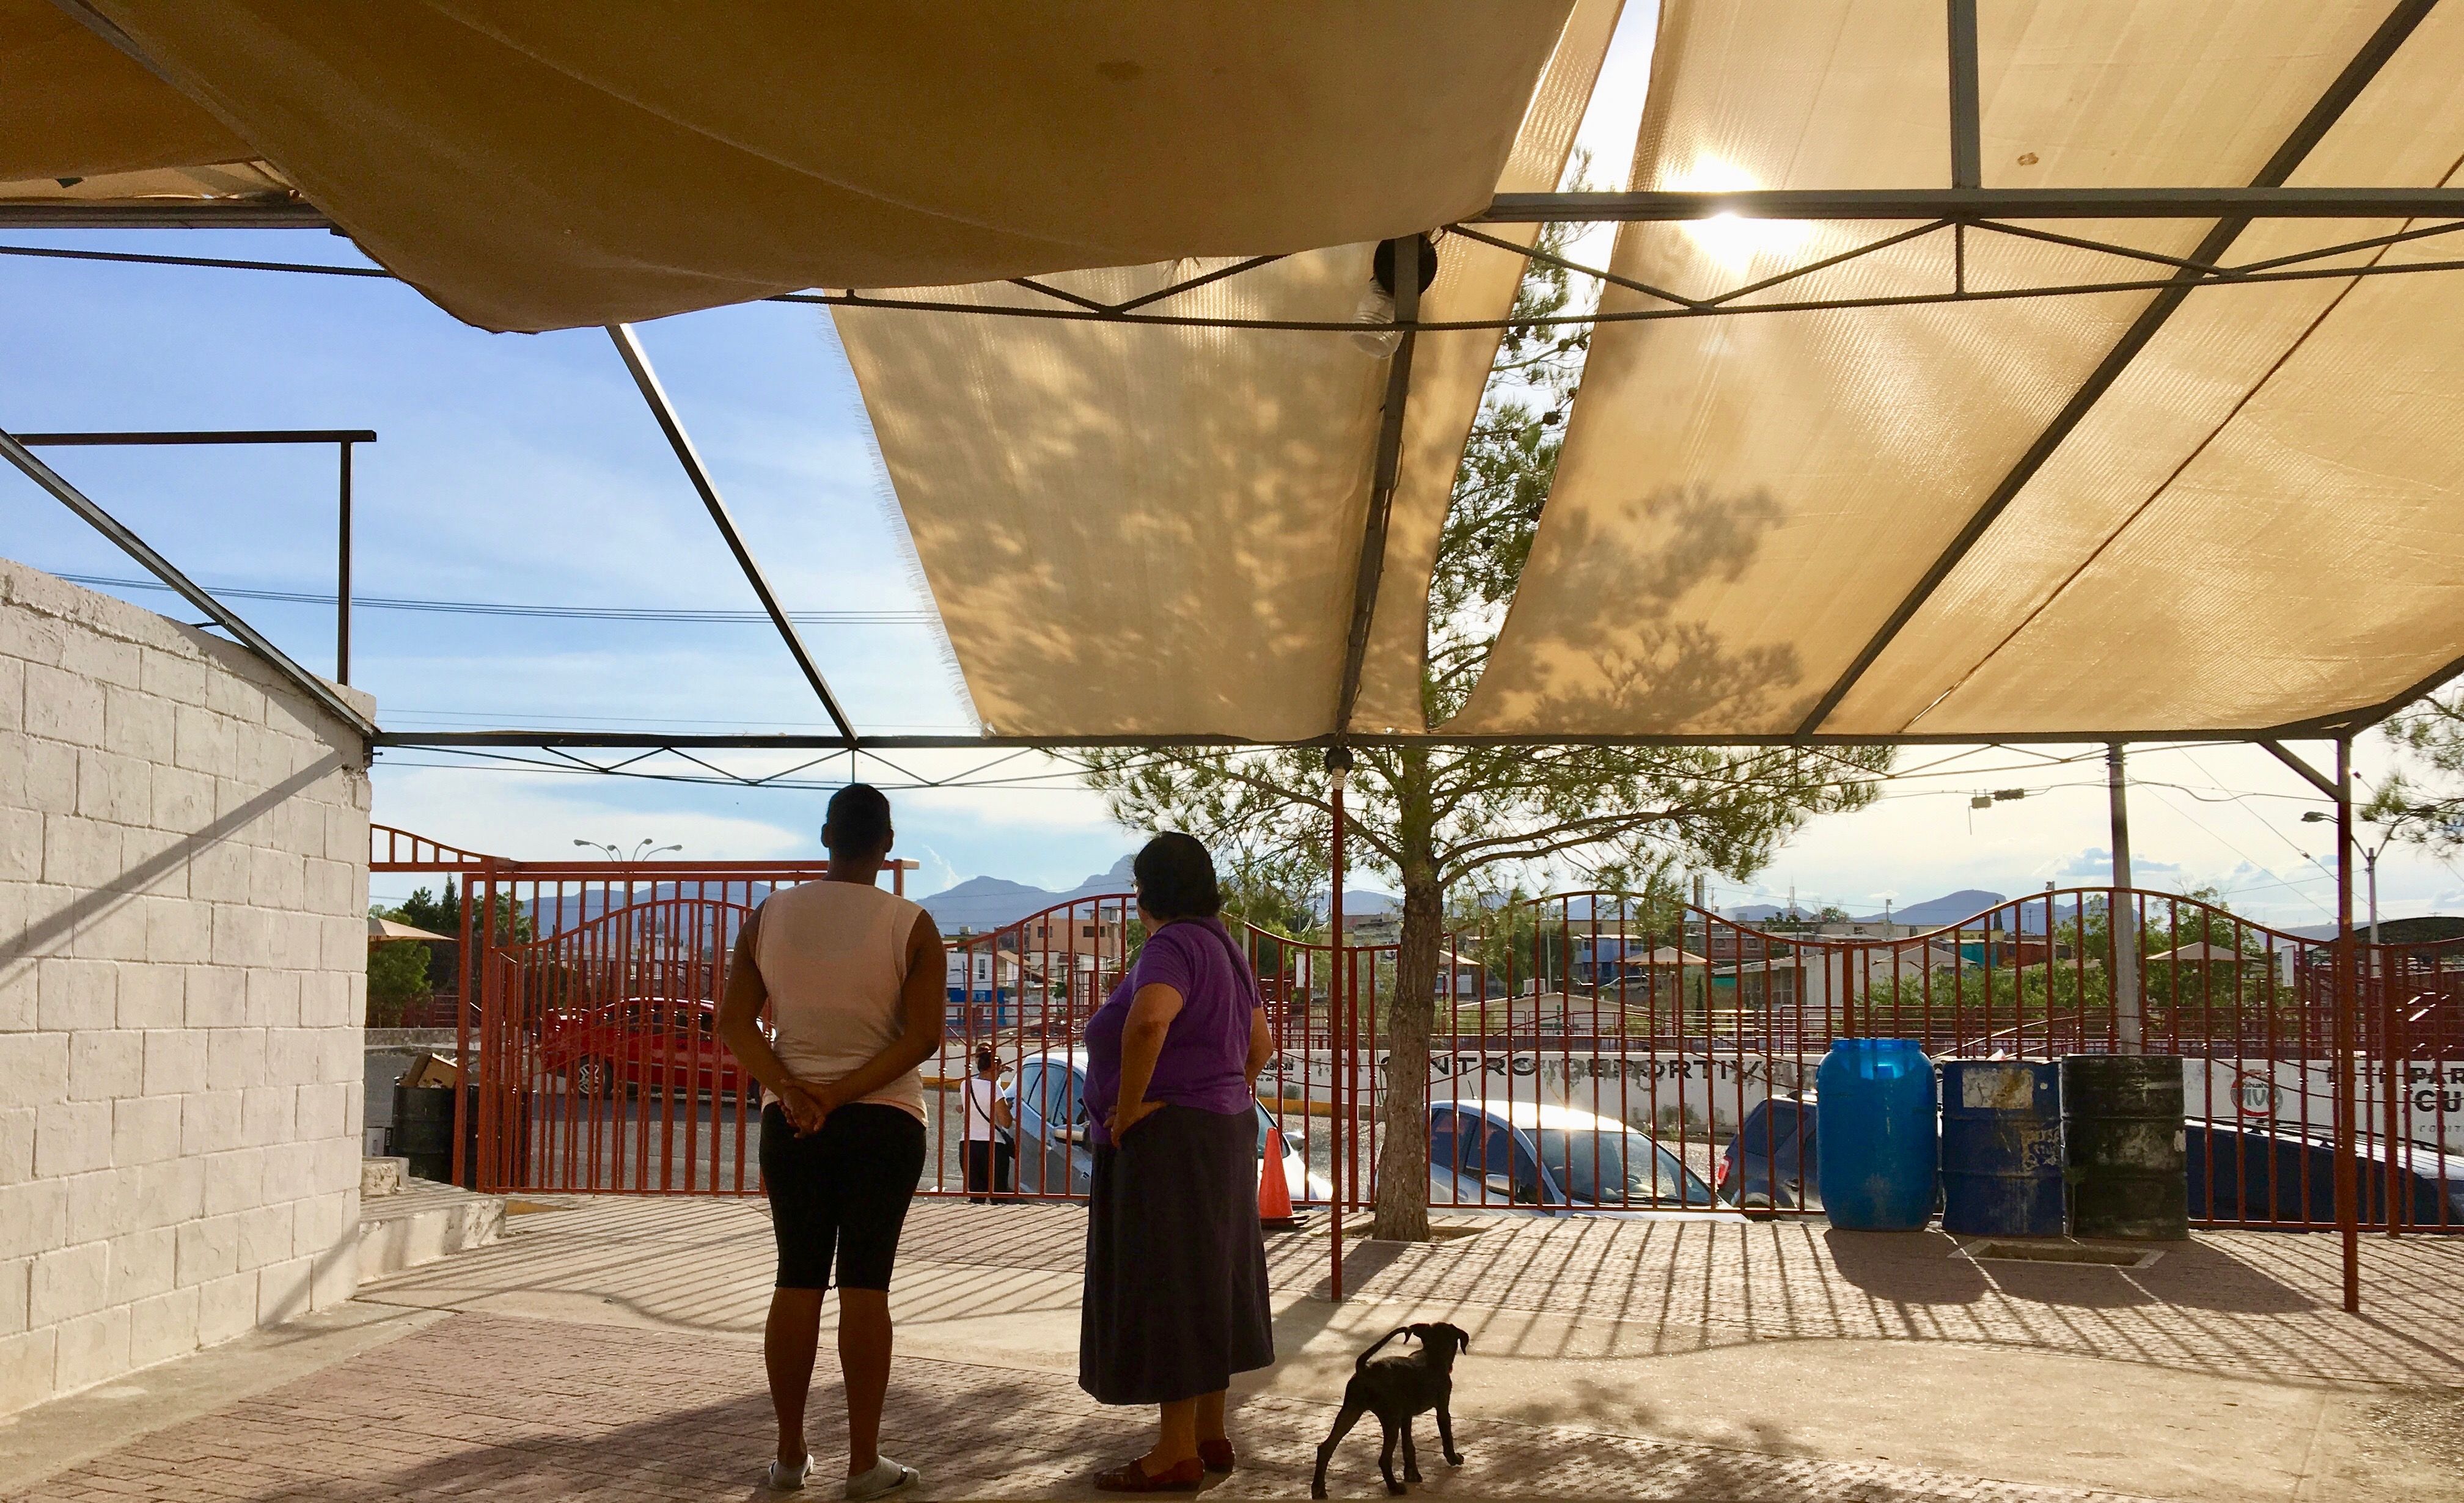 Sister Maria Antonia Aranda and a migrant woman from Cuba conferring outside a church in Juárez, Mexico in August 2019. Image by Lily Moore-Eissenberg. Mexico, 2019.